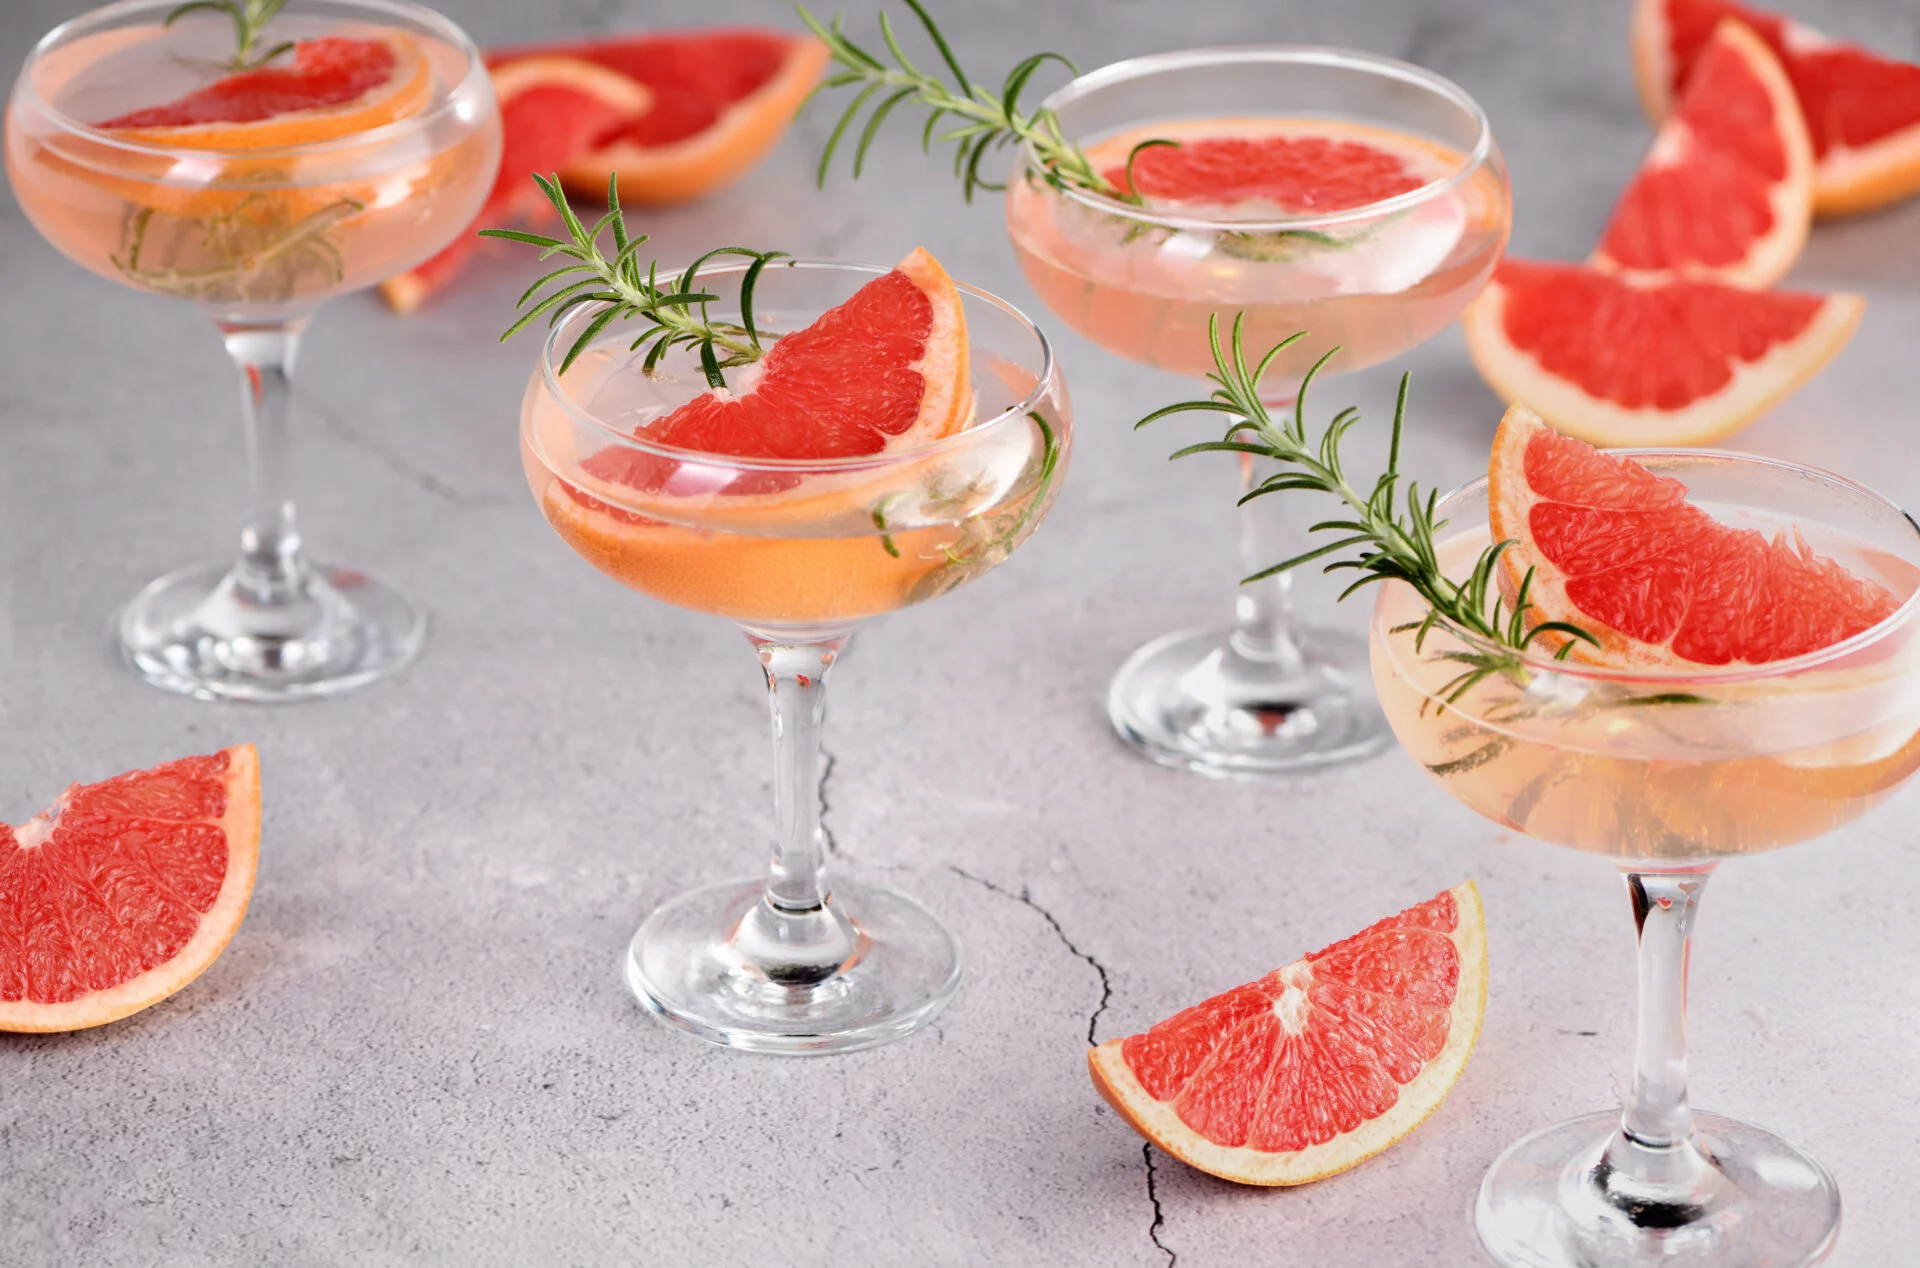 Goblet of sparkling wine with a slice of grapefruit